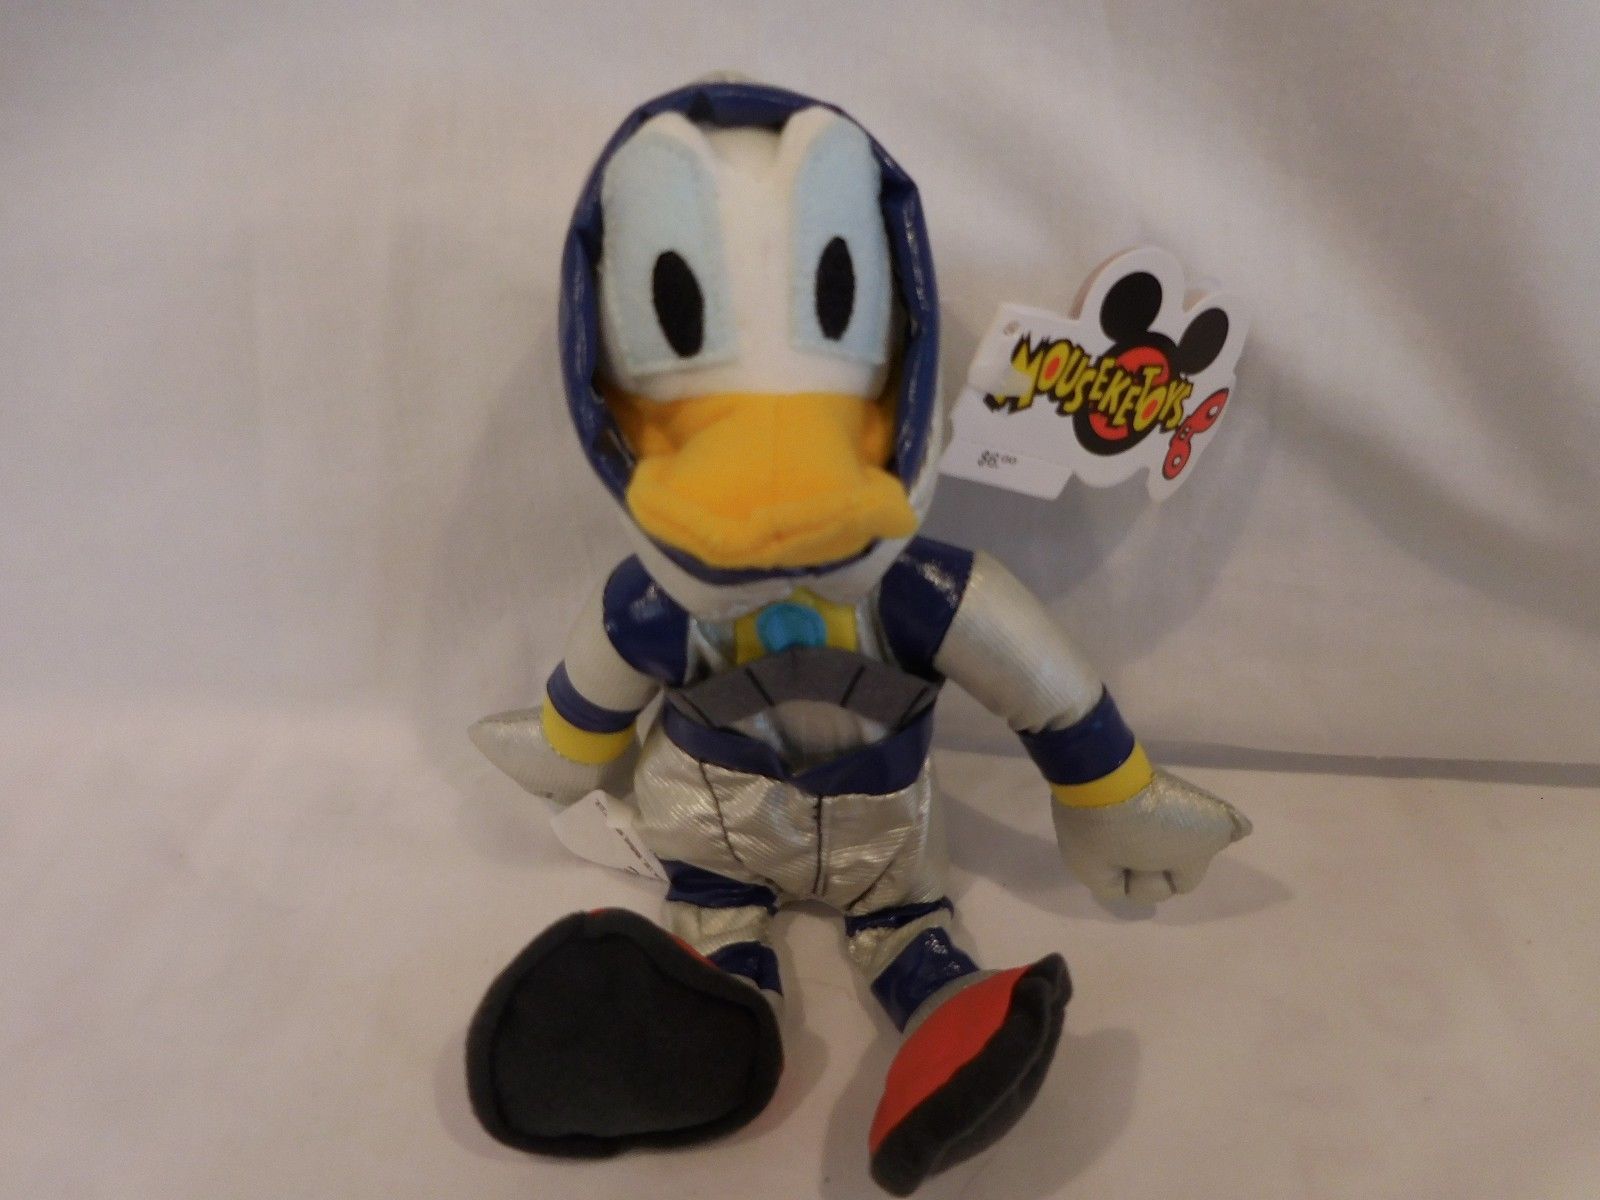 Disney SPACE DONALD DUCK PLUSH BEANIE New w/ Tags RETIRED - $10.22